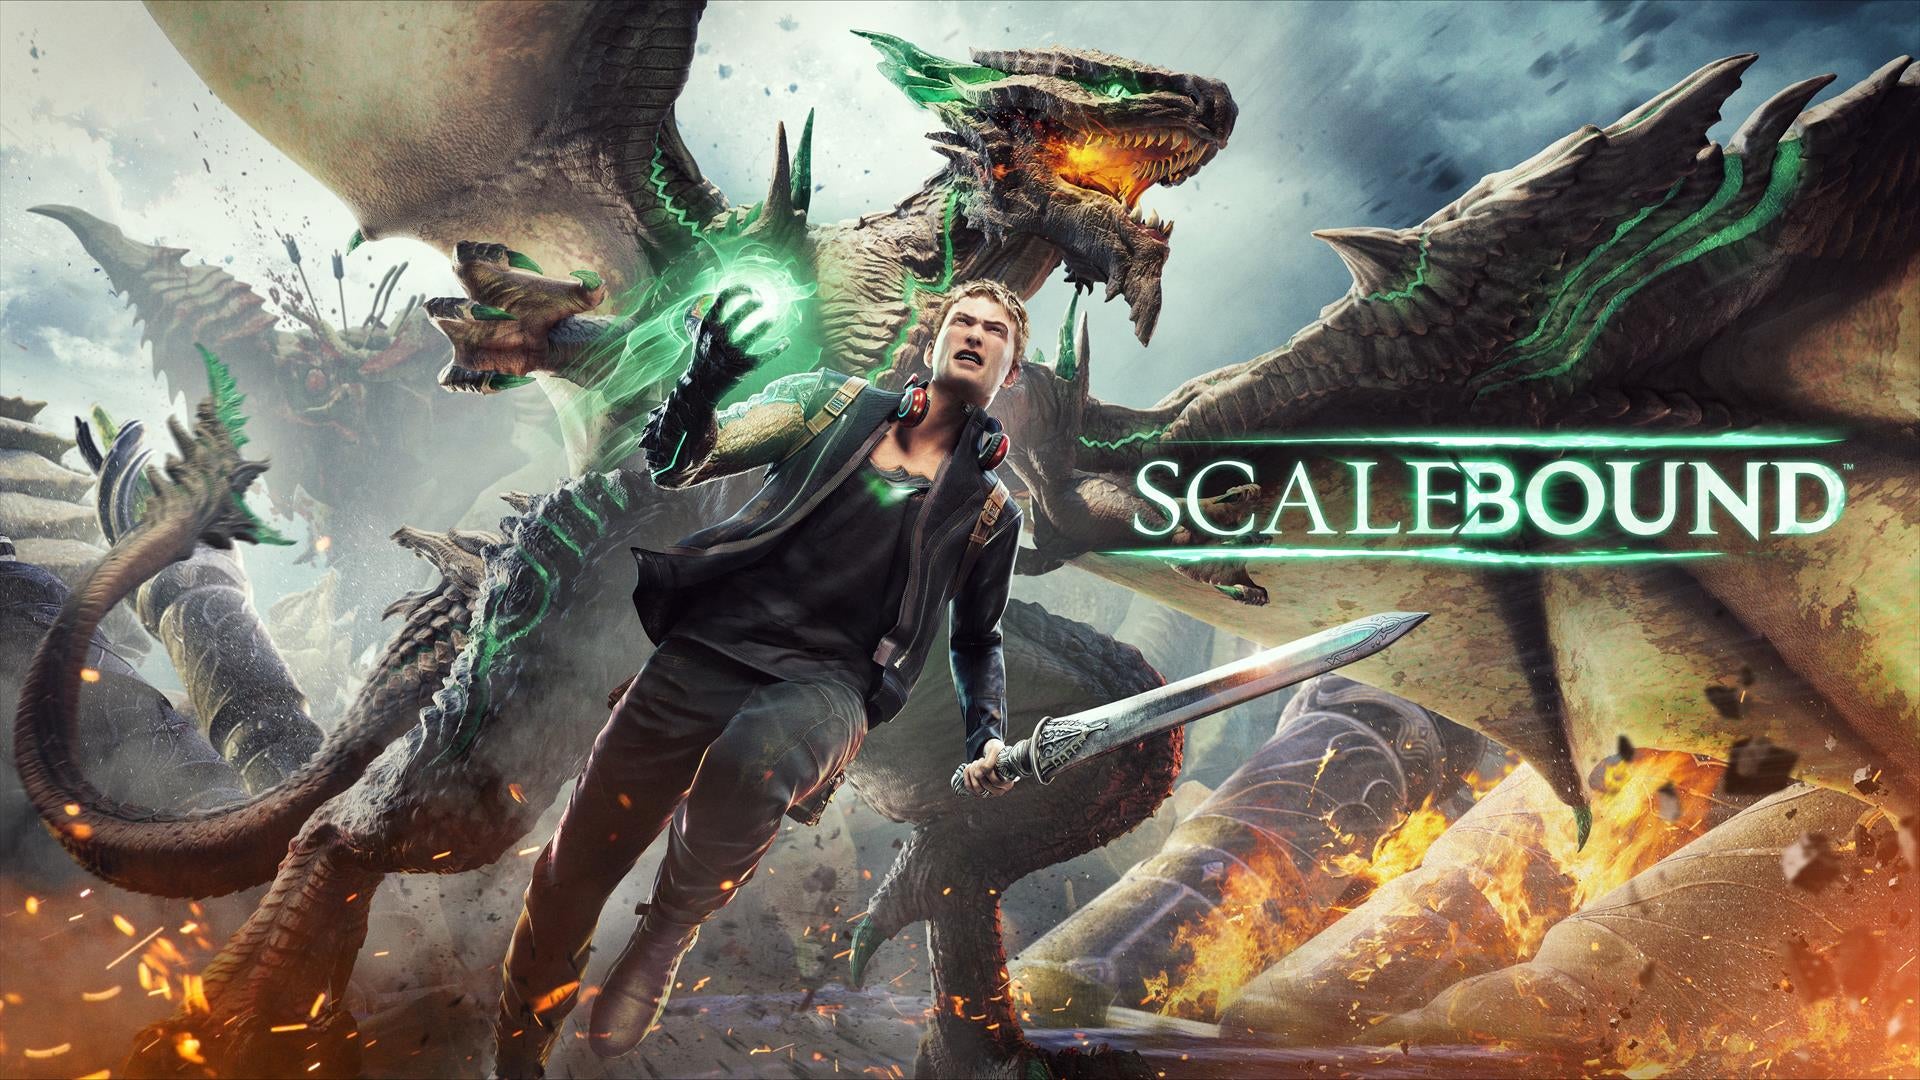 Image for Gamescom 2015: Scalebound release window announced